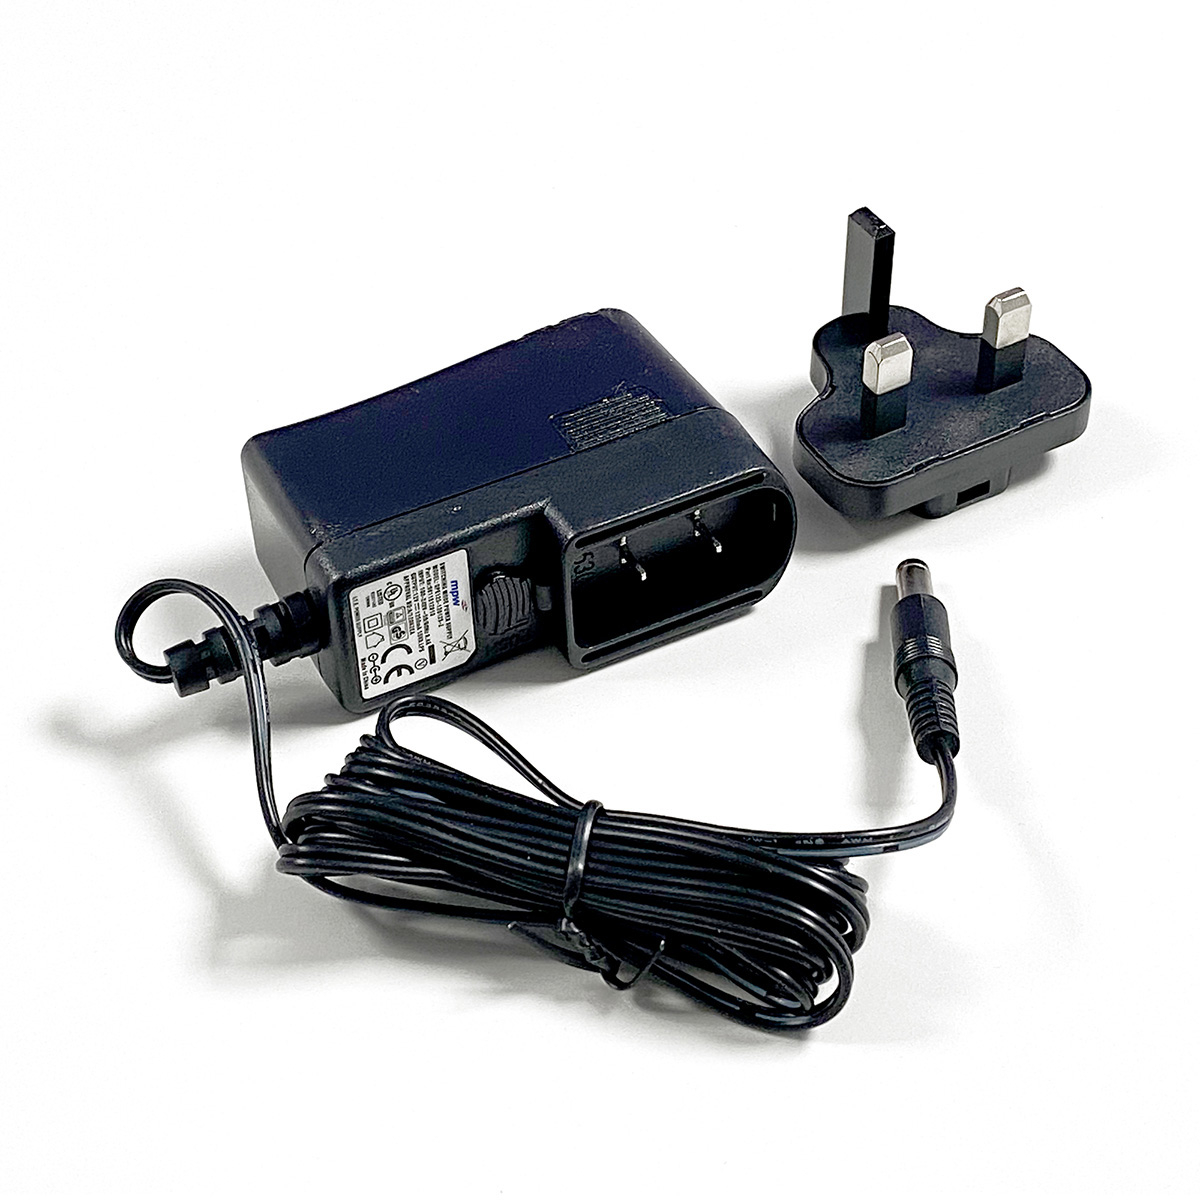 Rechargeable Safety Light Includes 12v Adapter UK Plug